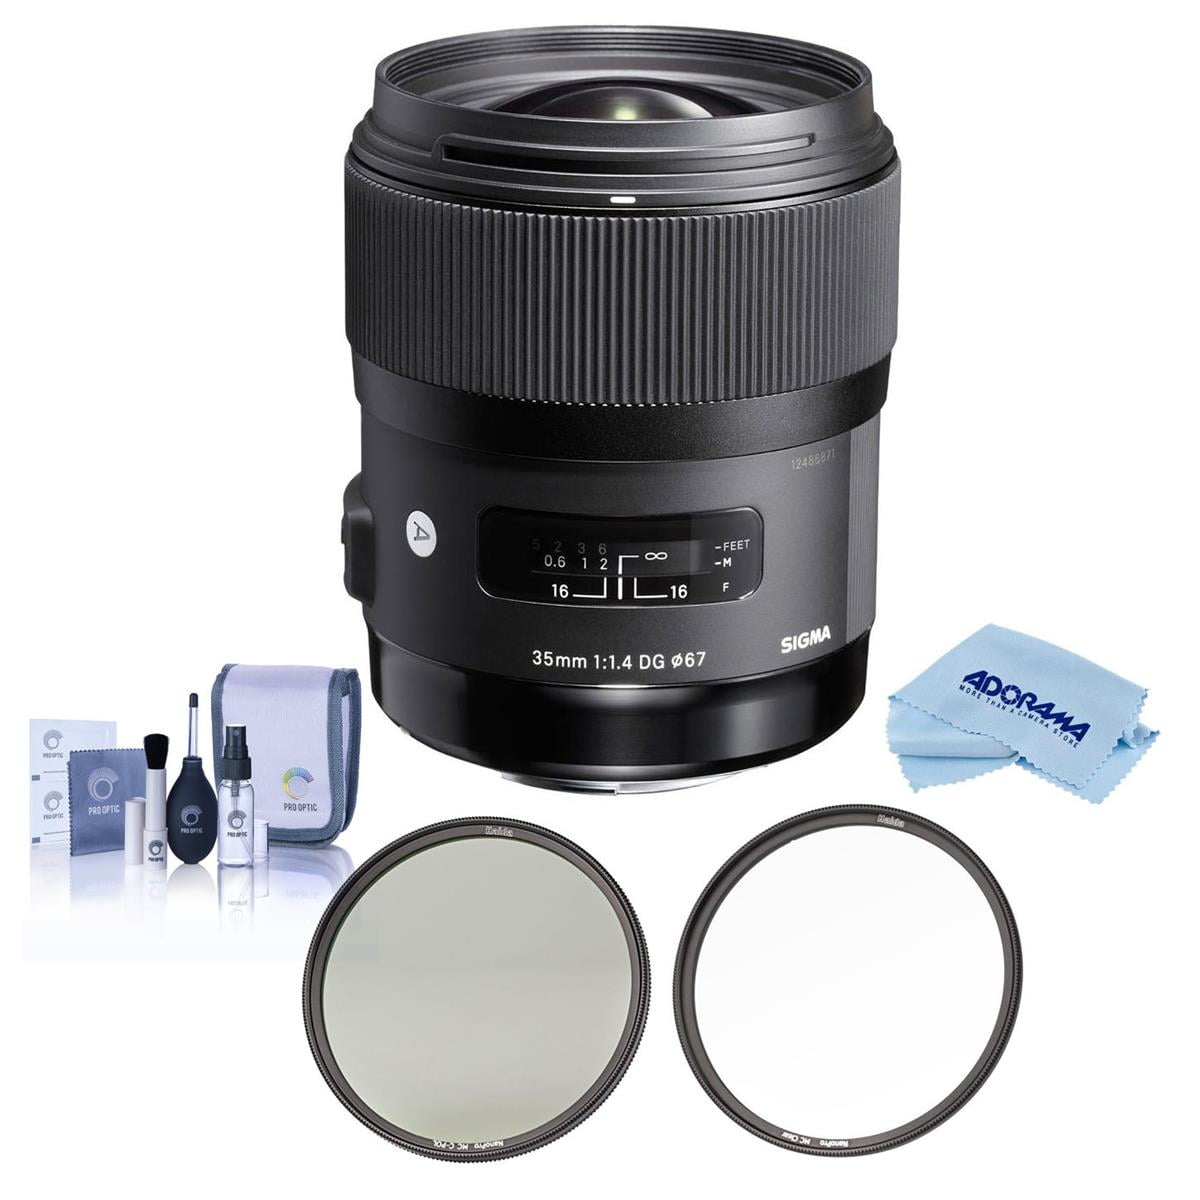 + BONUS UltraPro Bundle: Cleani Includes Multi-Coated 4-Pc Close-Up Macro Set 40.5mm Digital Pro High-Resolution Close-Up Macro Filter Set with Pouch for the Samsung NX300 with Samsung 20-50mm lens Deluxe Filter Carry Case +1, +2, +4, and +10 Diopters 